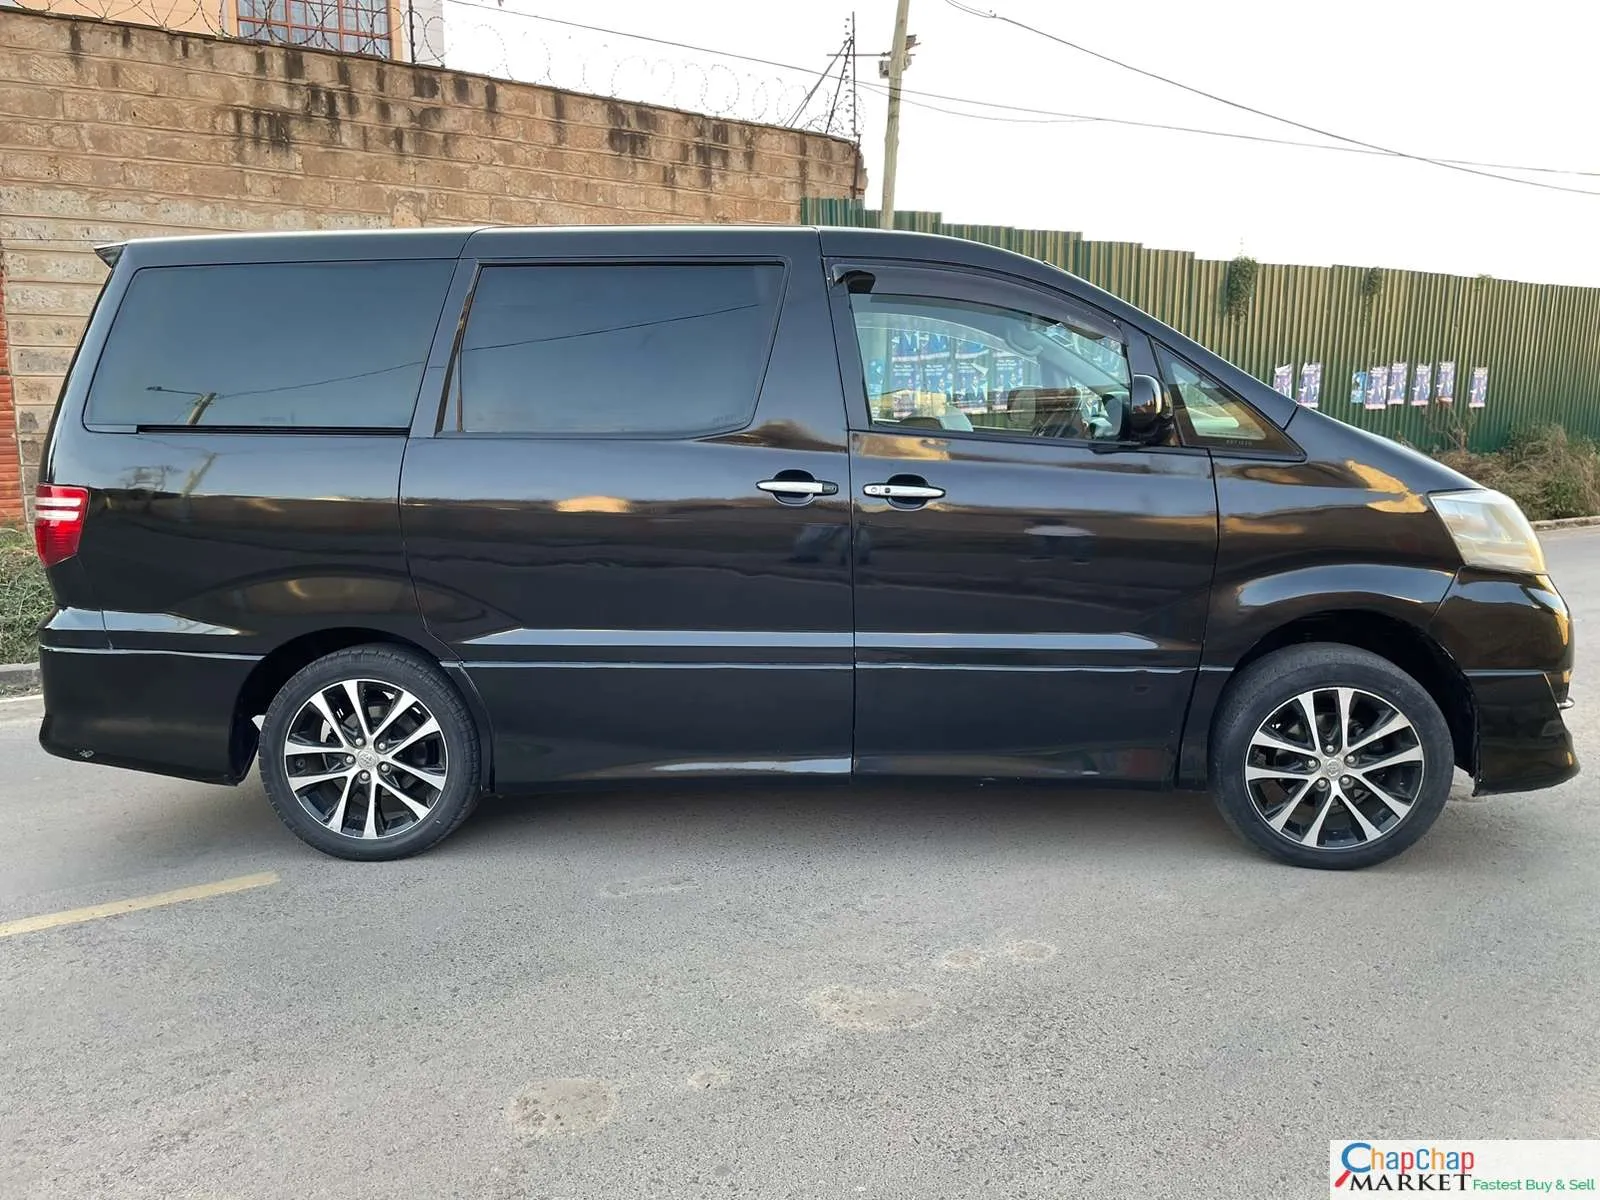 Cars Cars For Sale/Vehicles-Toyota Alphard 850k ONLY You Pay 30% Deposit Trade in OK EXCLUSIVE 9